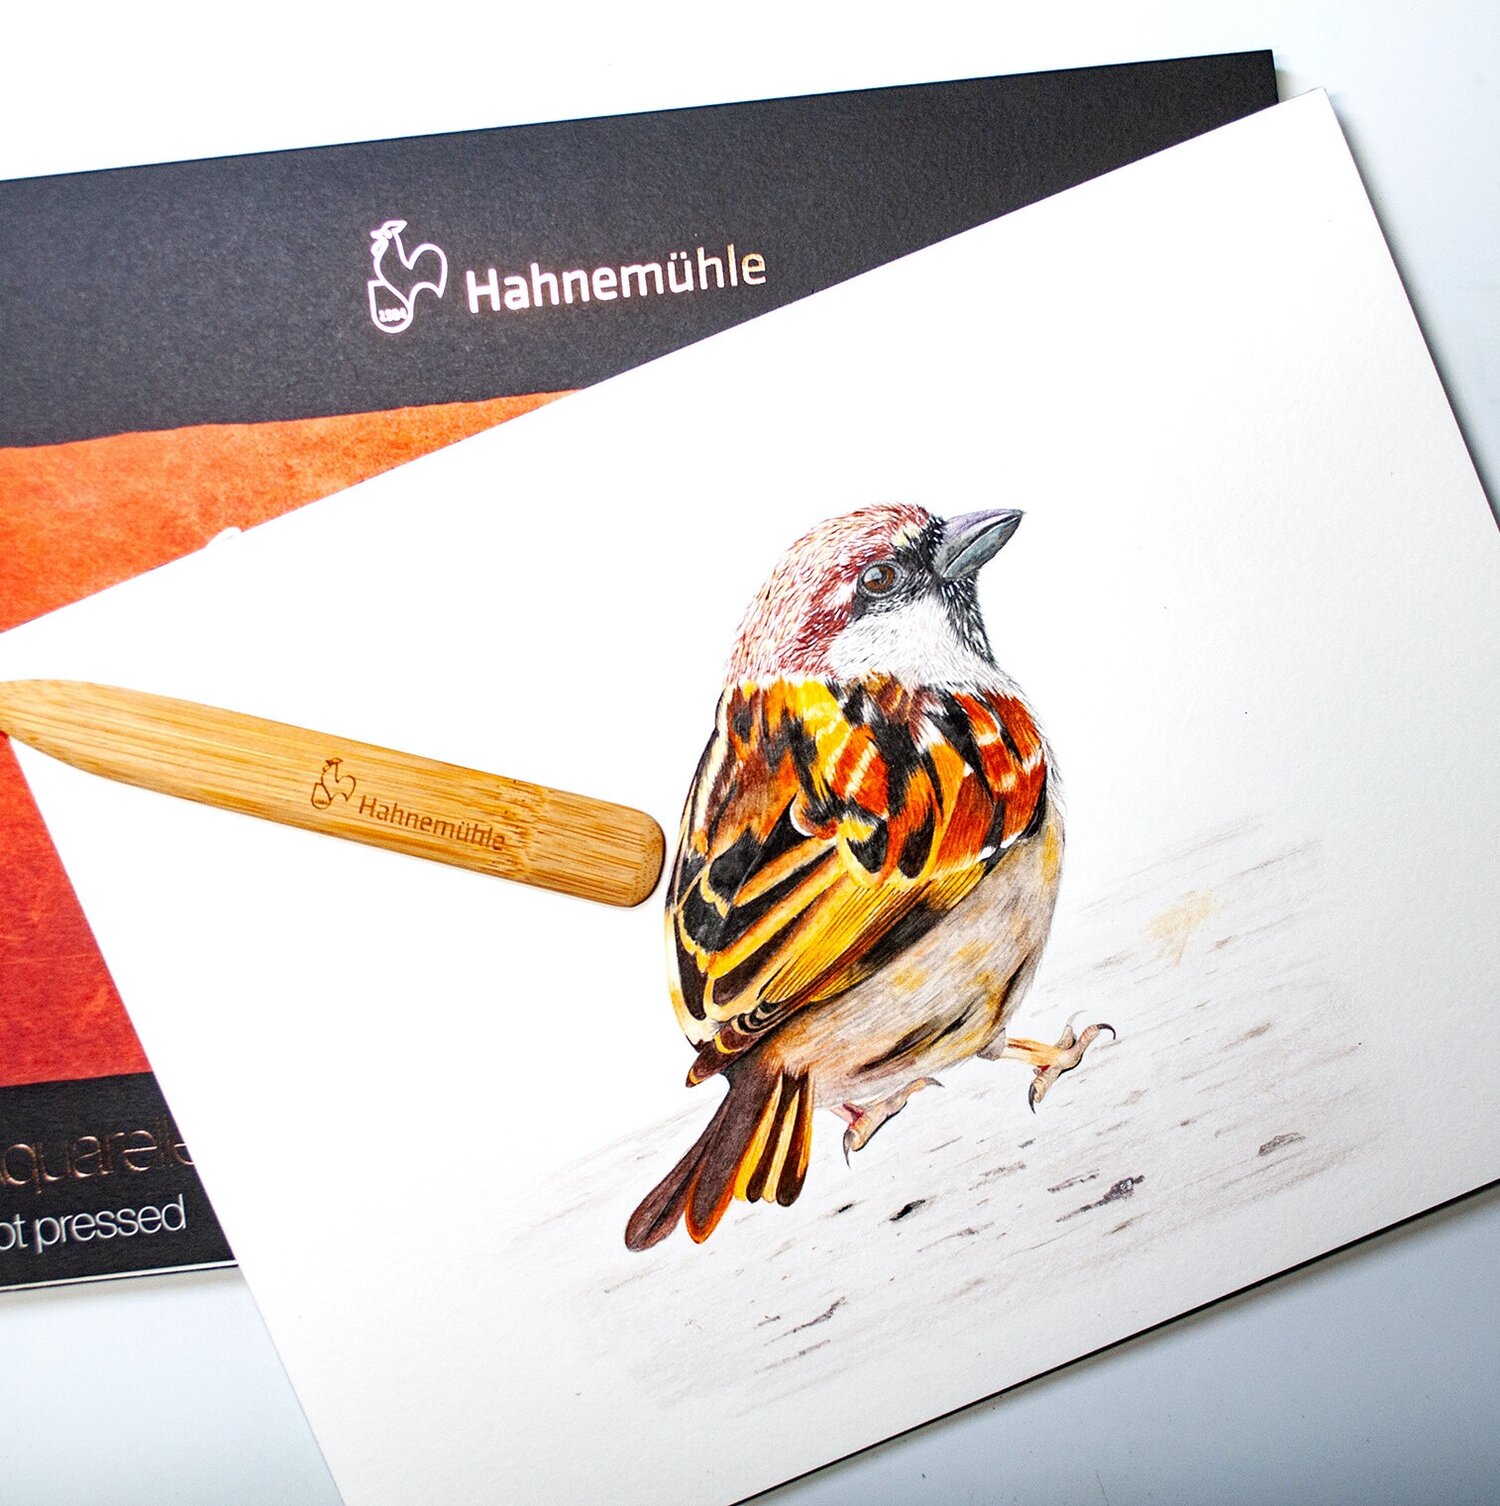 Hahnemuhle Watercolor Paper — Recent Art Projects — The Art Gear Guide